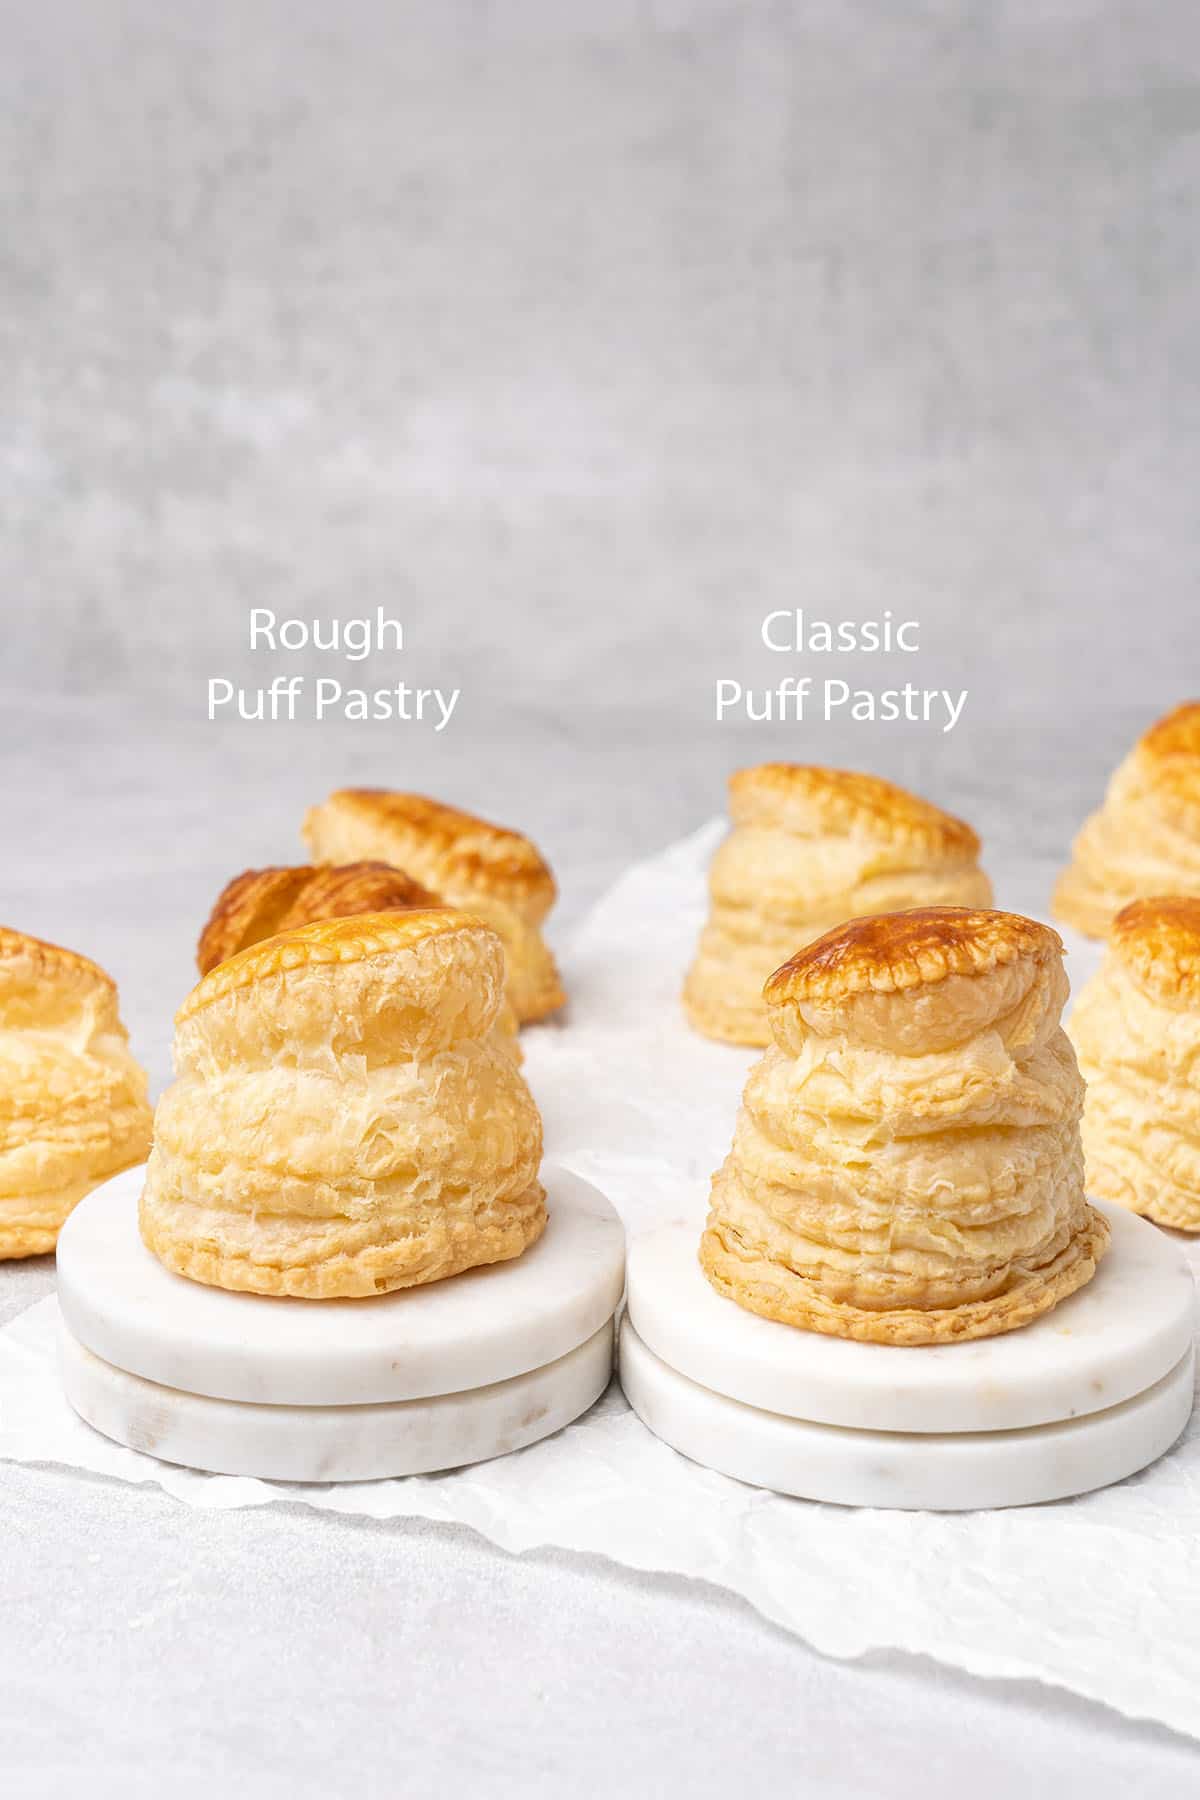 Rough Puff pastry and classic puff pastry.